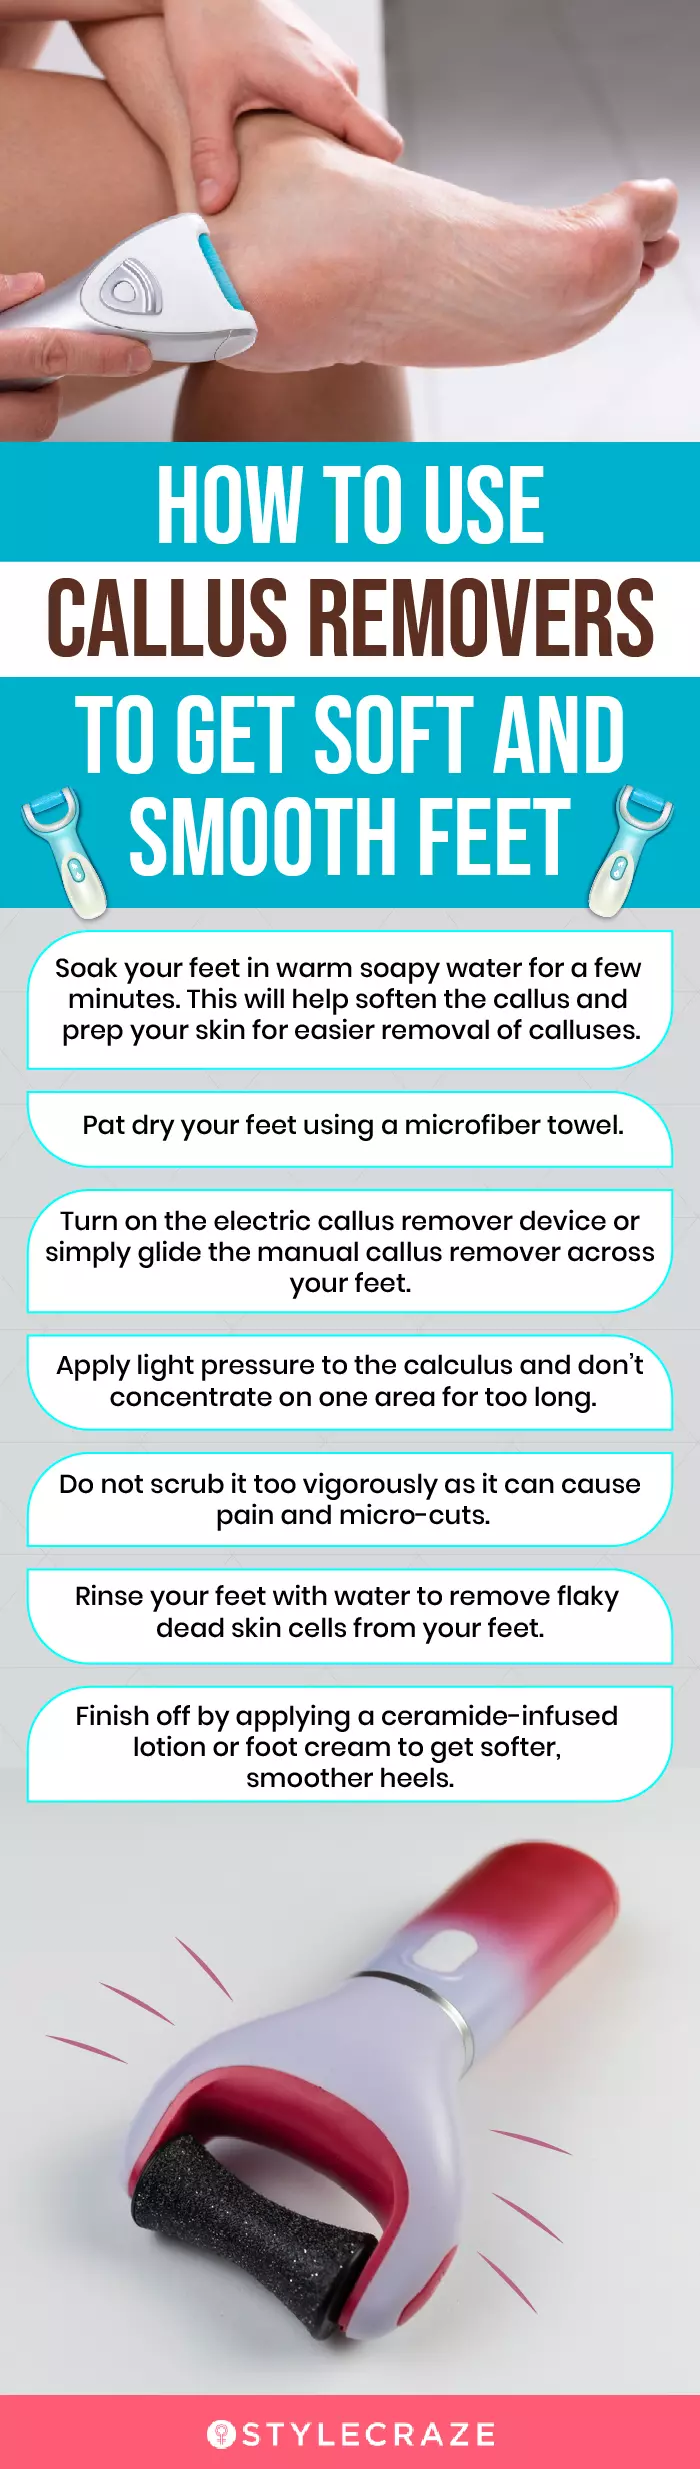 How To Use Callus Removers To Get Soft And Smooth Feet (infographic)